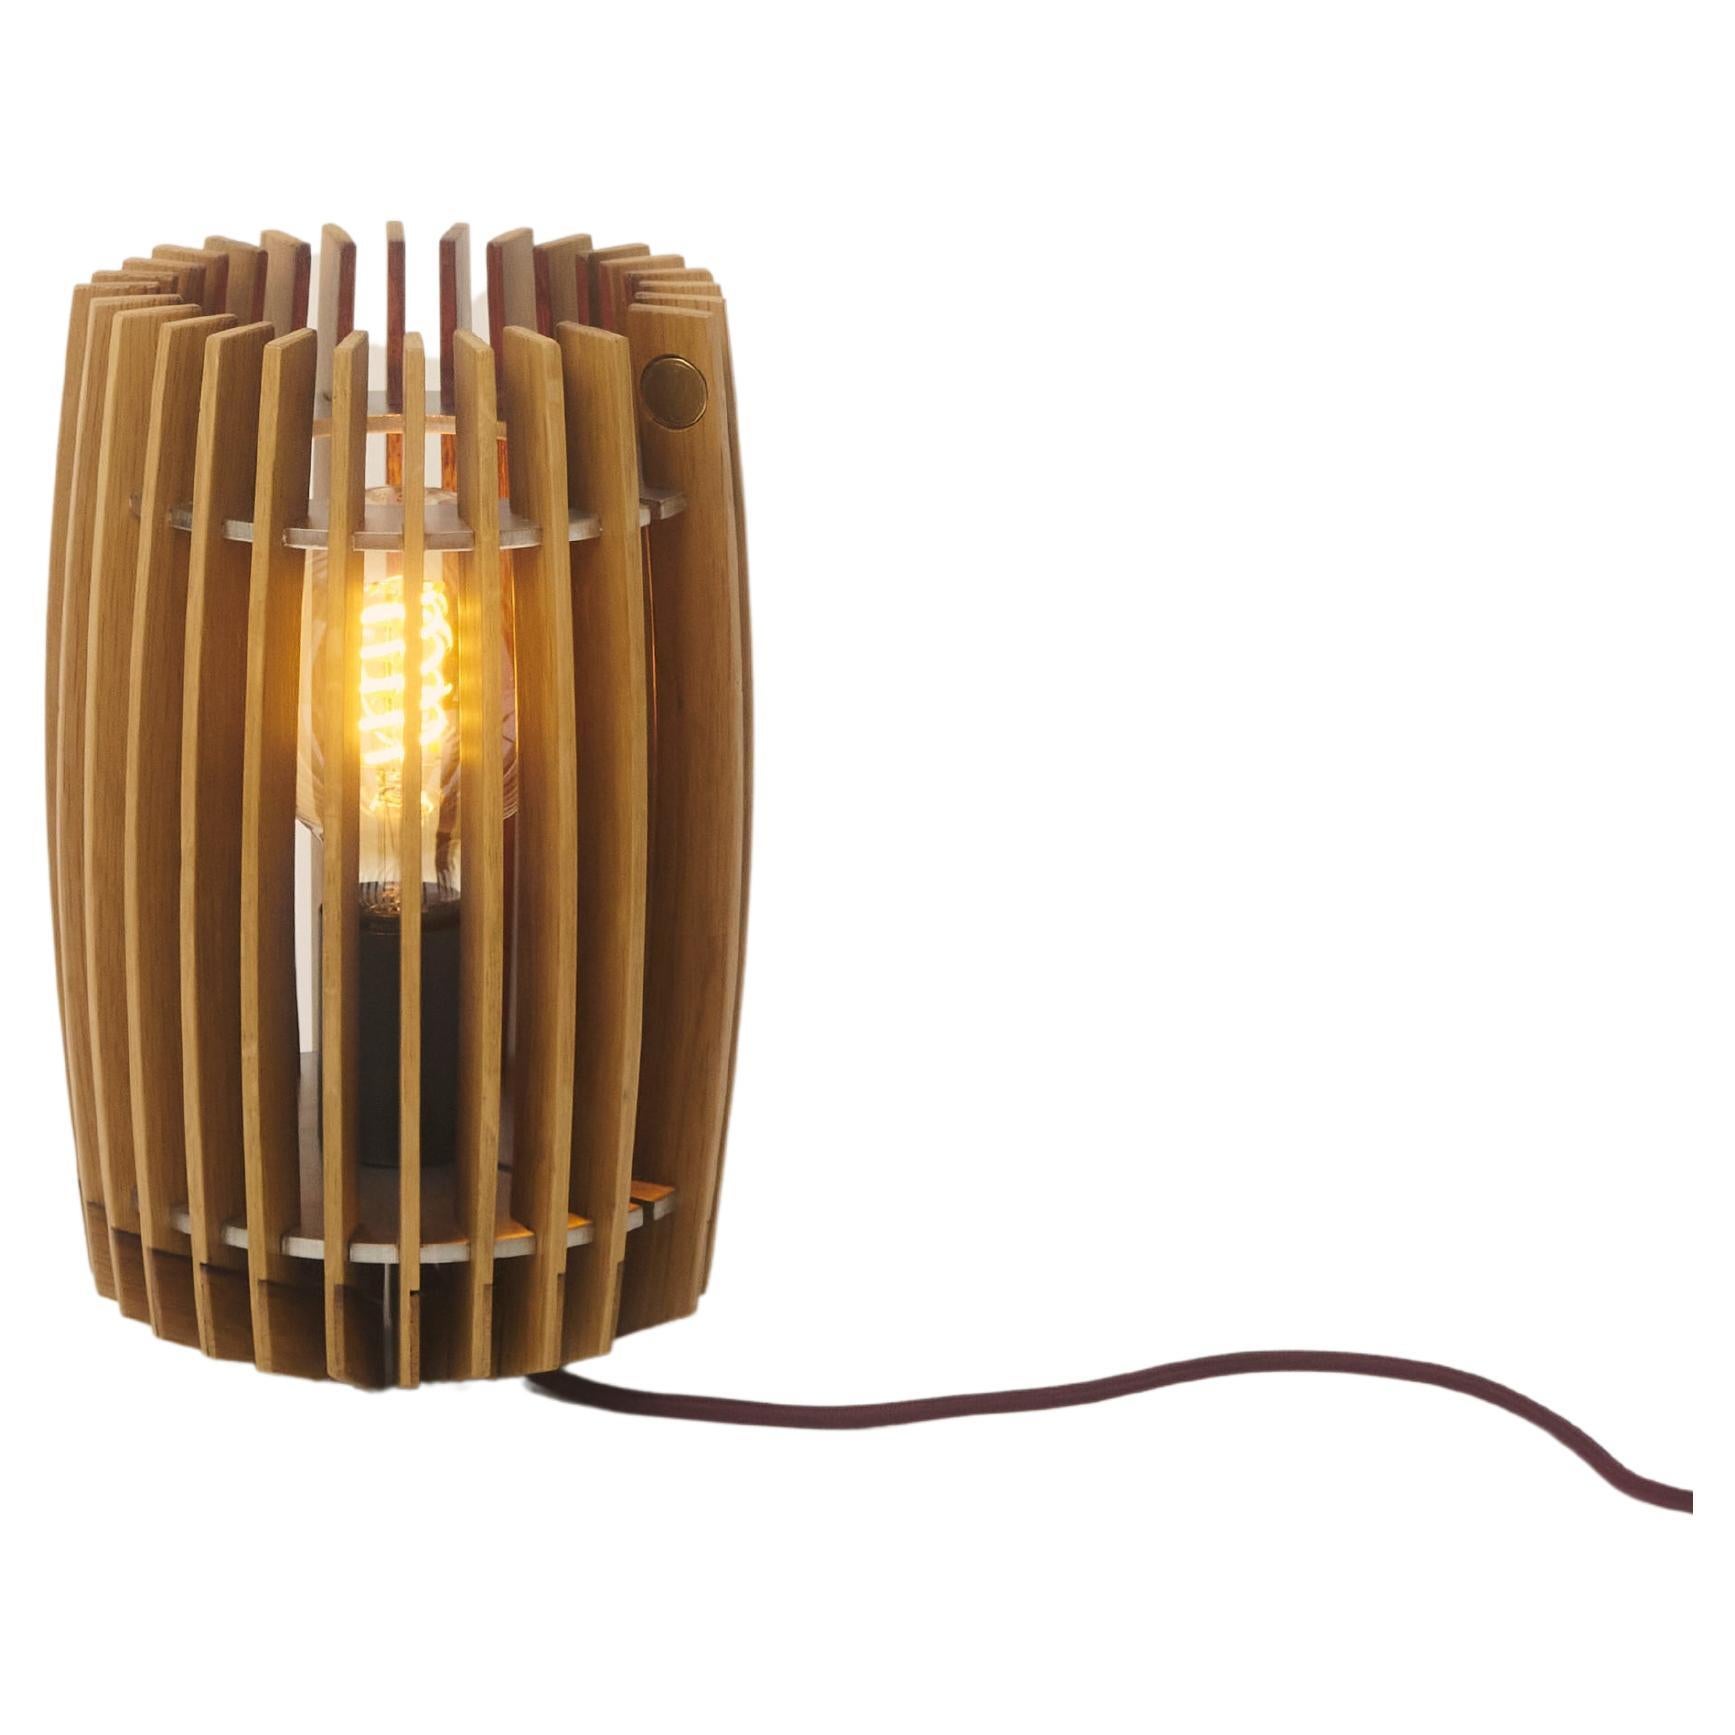 Bosa table lamp by Winetage handmade in Italy For Sale